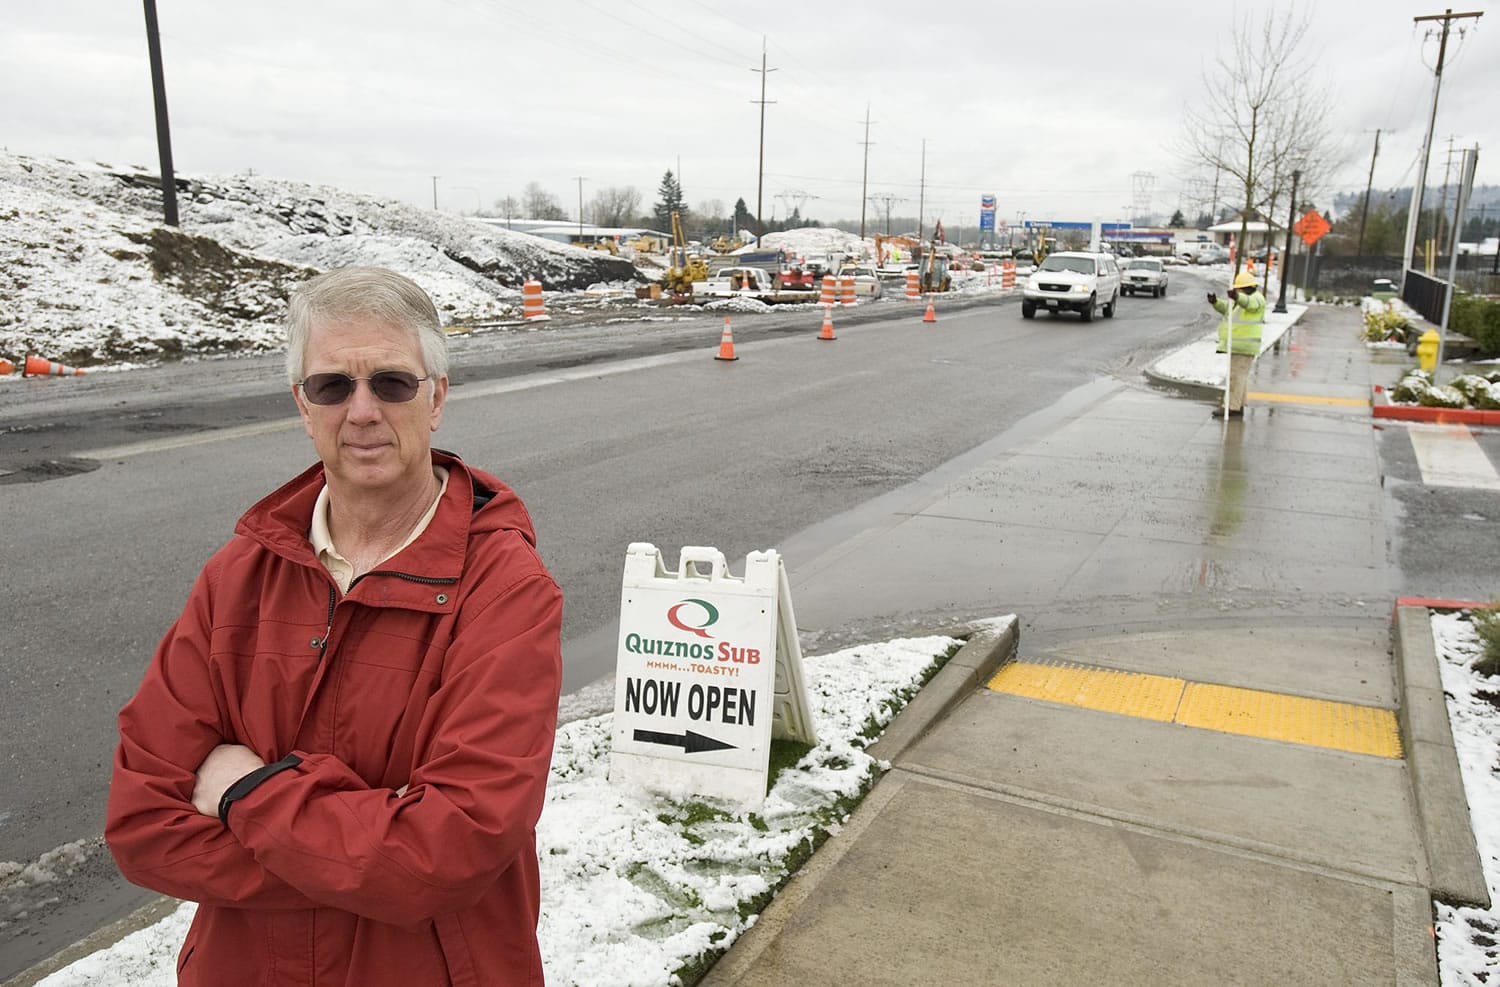 Washougal Quiznos owner Mitch Hammontree said restaurant sales are down by more than 50 percent because the sandwich shop is obscured from view by a mound of dirt brought in to rebuild interchanges on state Highway 14.